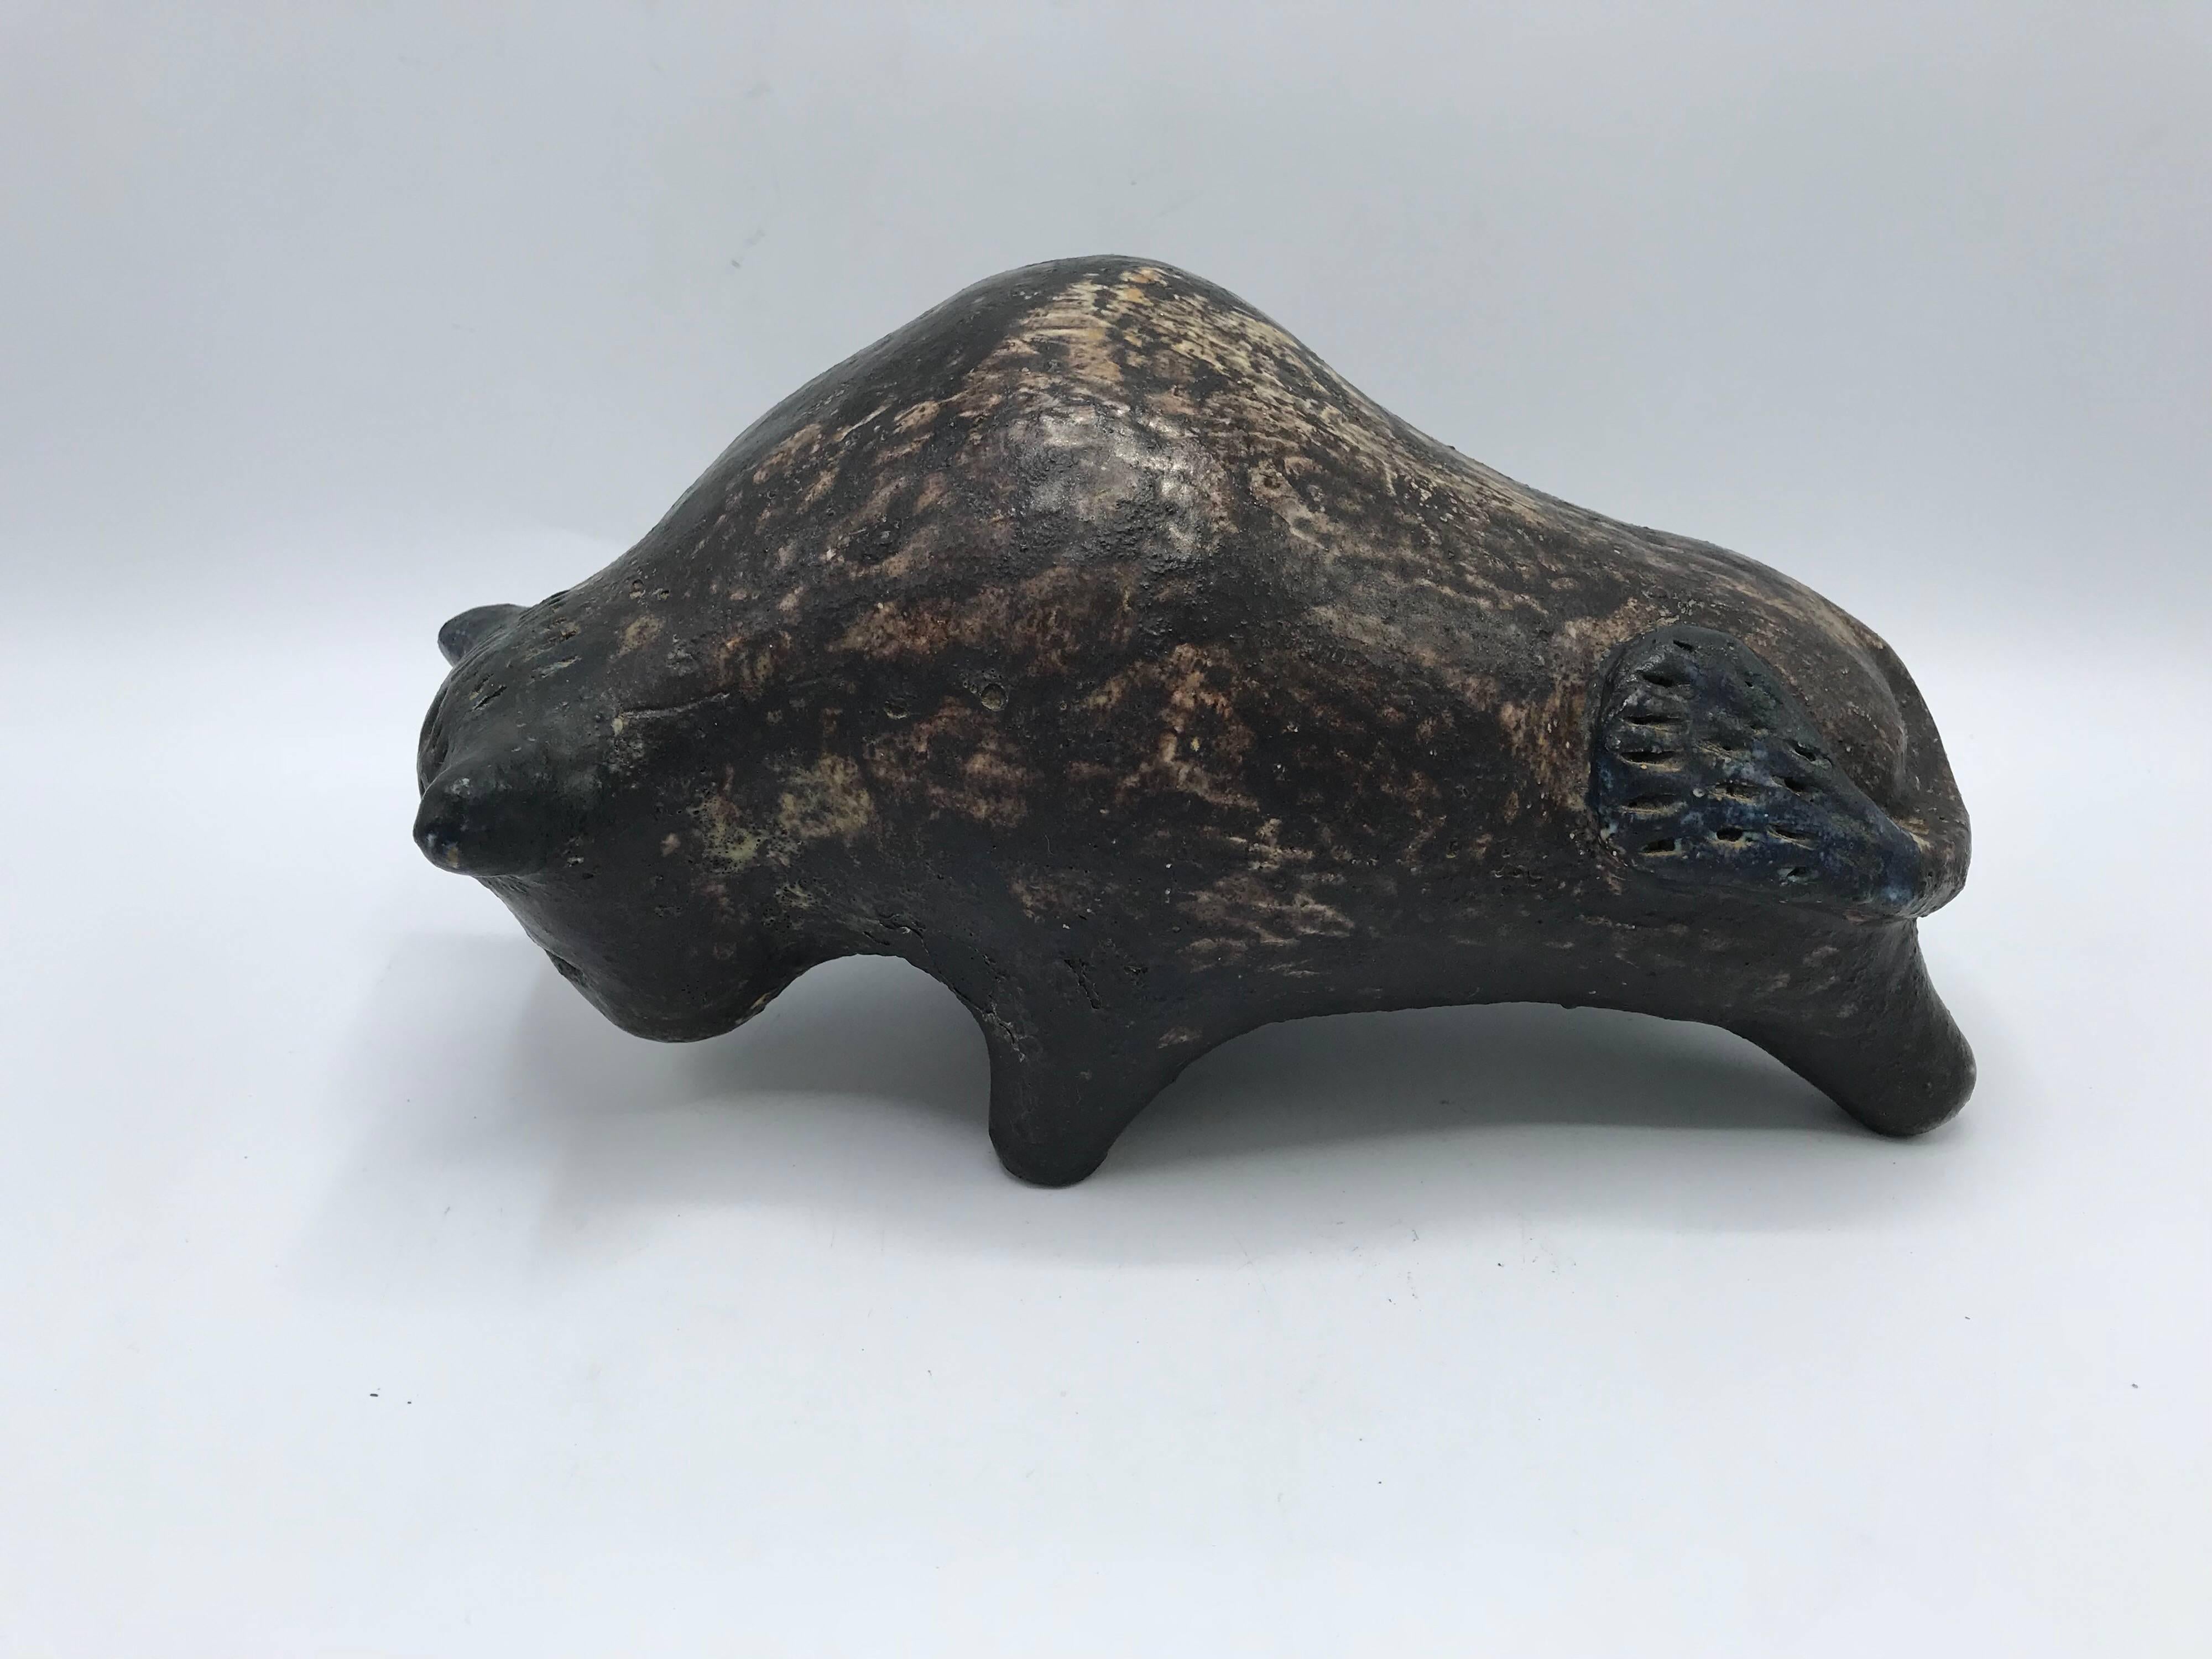 Listed is a fabulous, Italian Mid-Century Modern, 1960s Bitossi style ceramic pottery bull sculpture. The brown coloring has a semi-gloss finish to the ceramic.